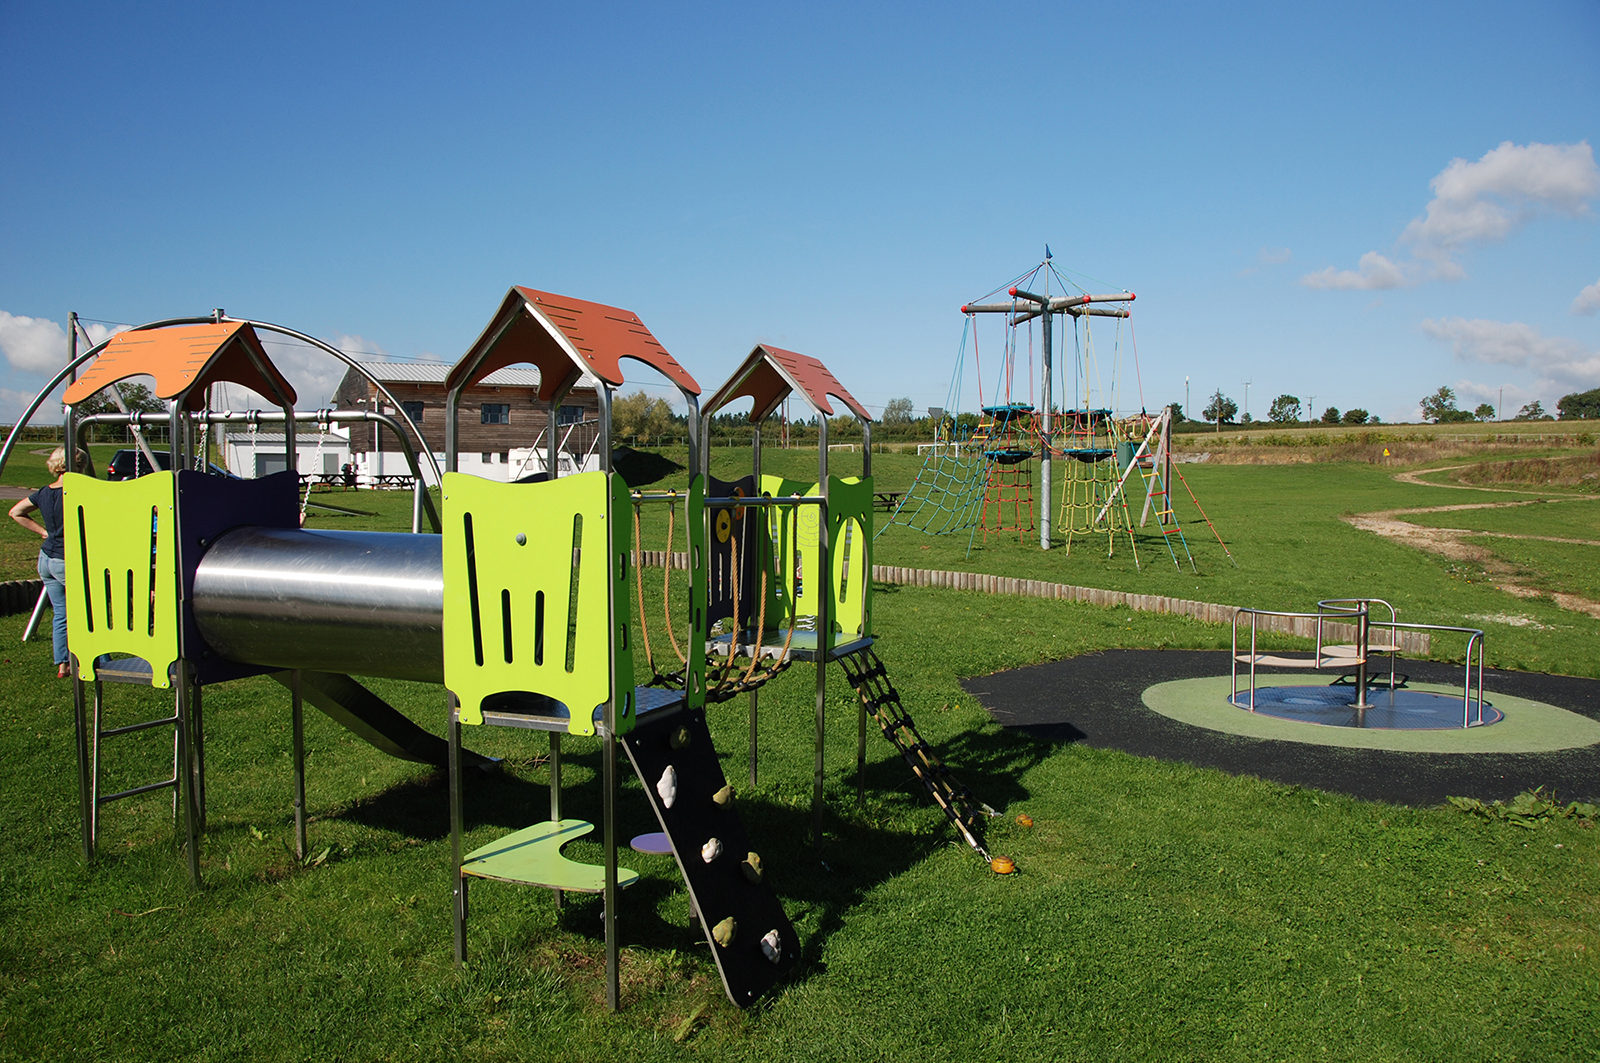 Free play area for children